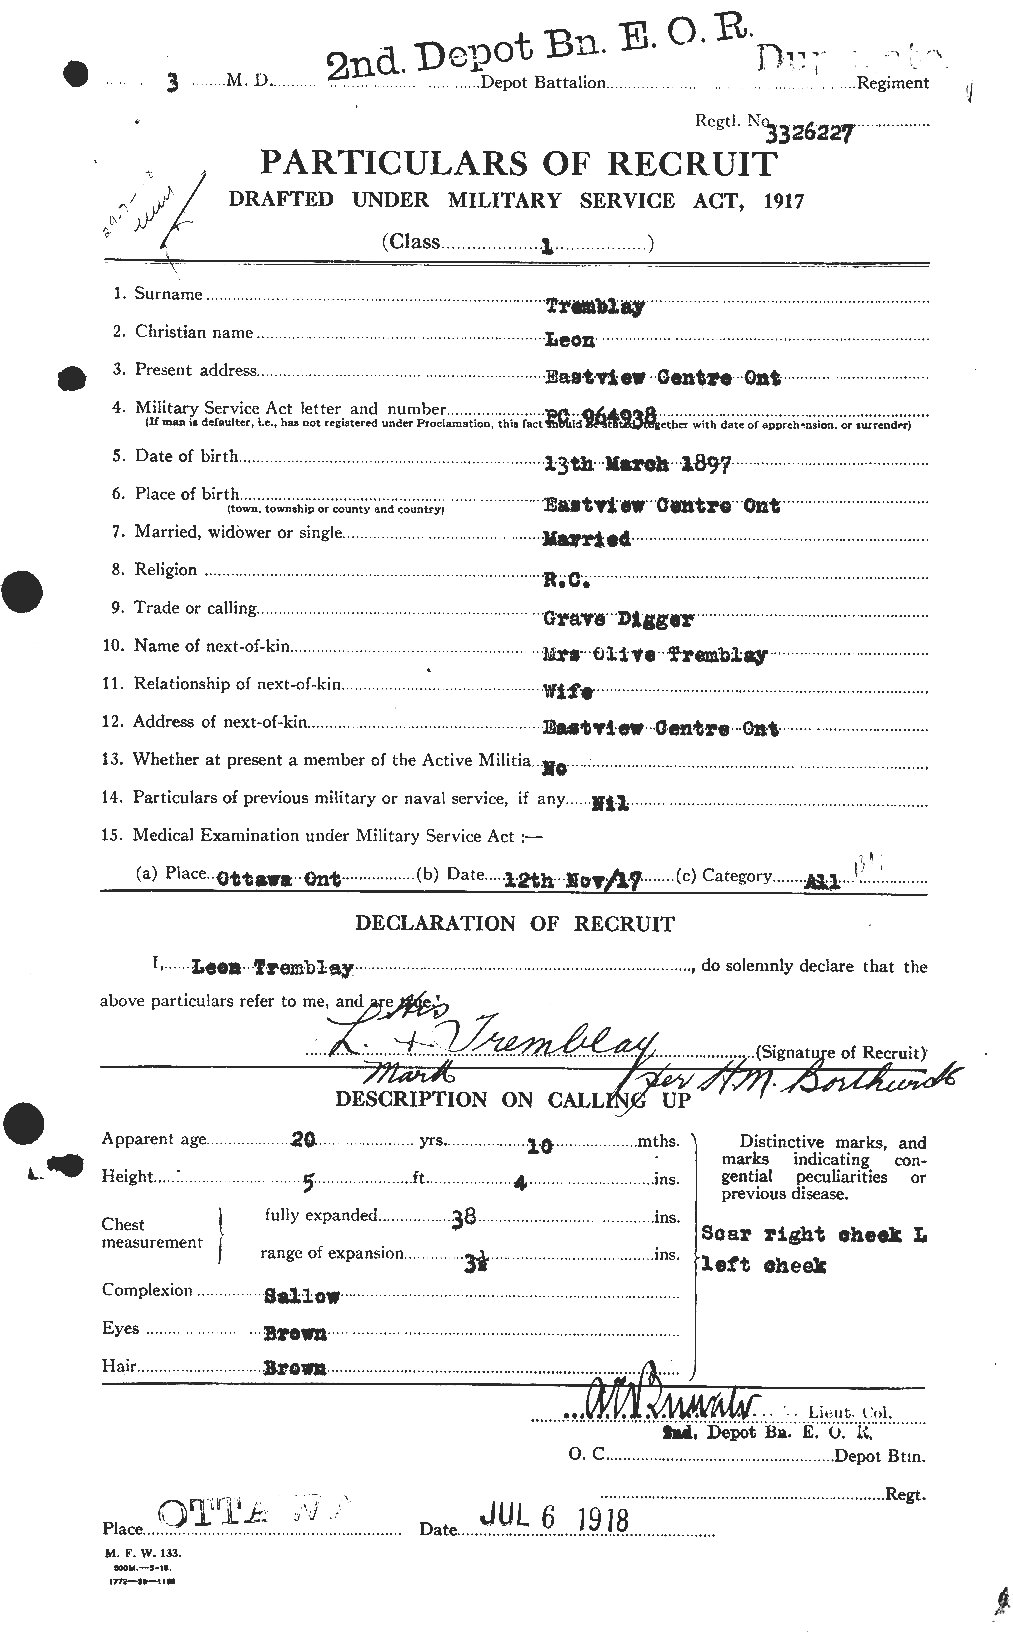 Personnel Records of the First World War - CEF 639177a